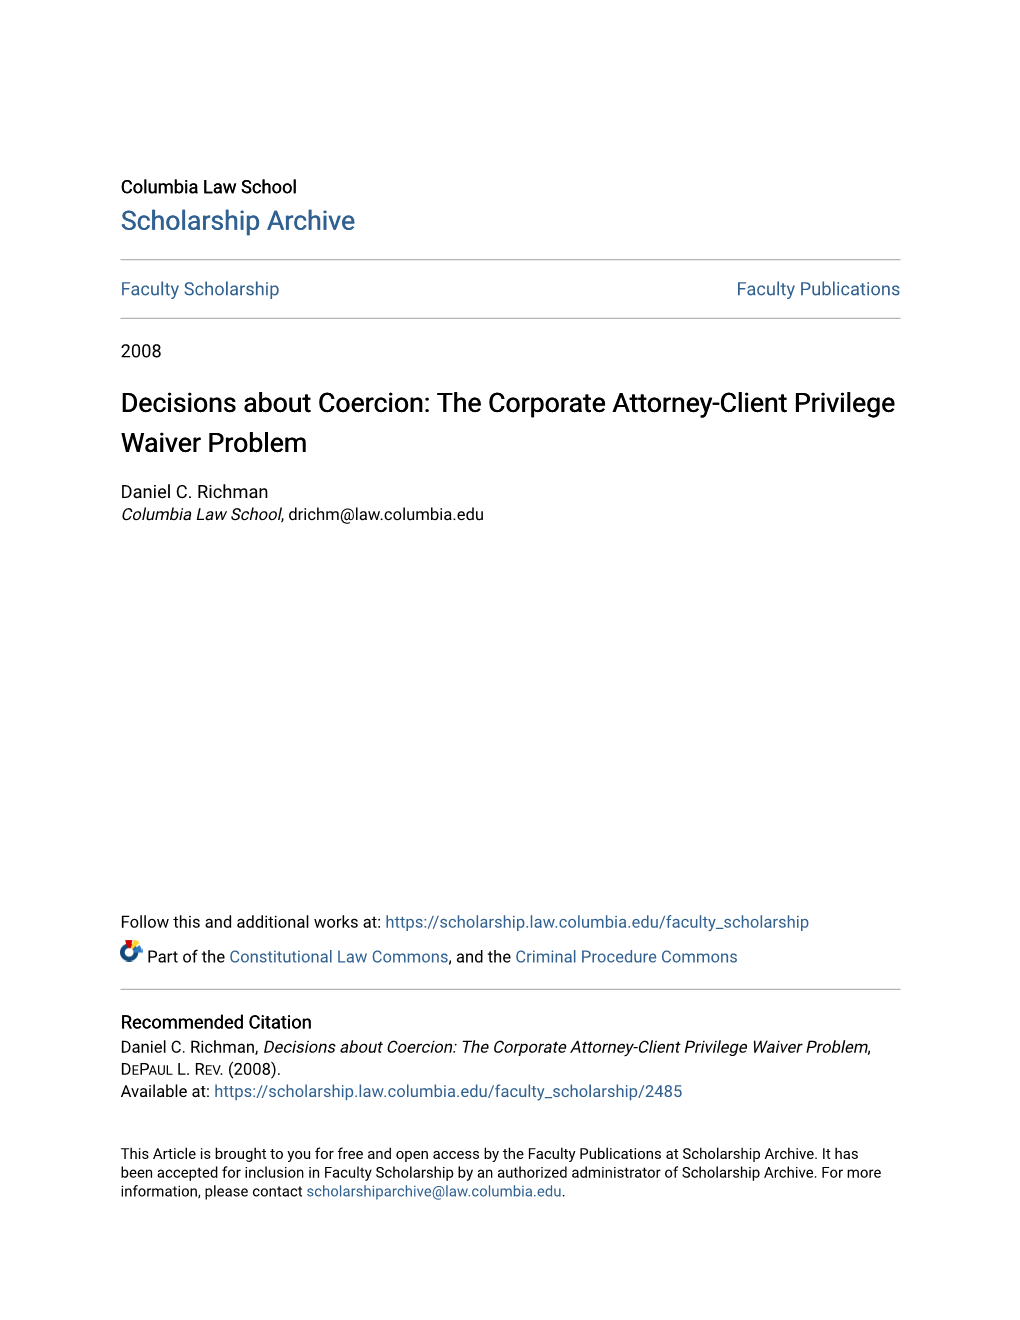 Decisions About Coercion: the Corporate Attorney-Client Privilege Waiver Problem